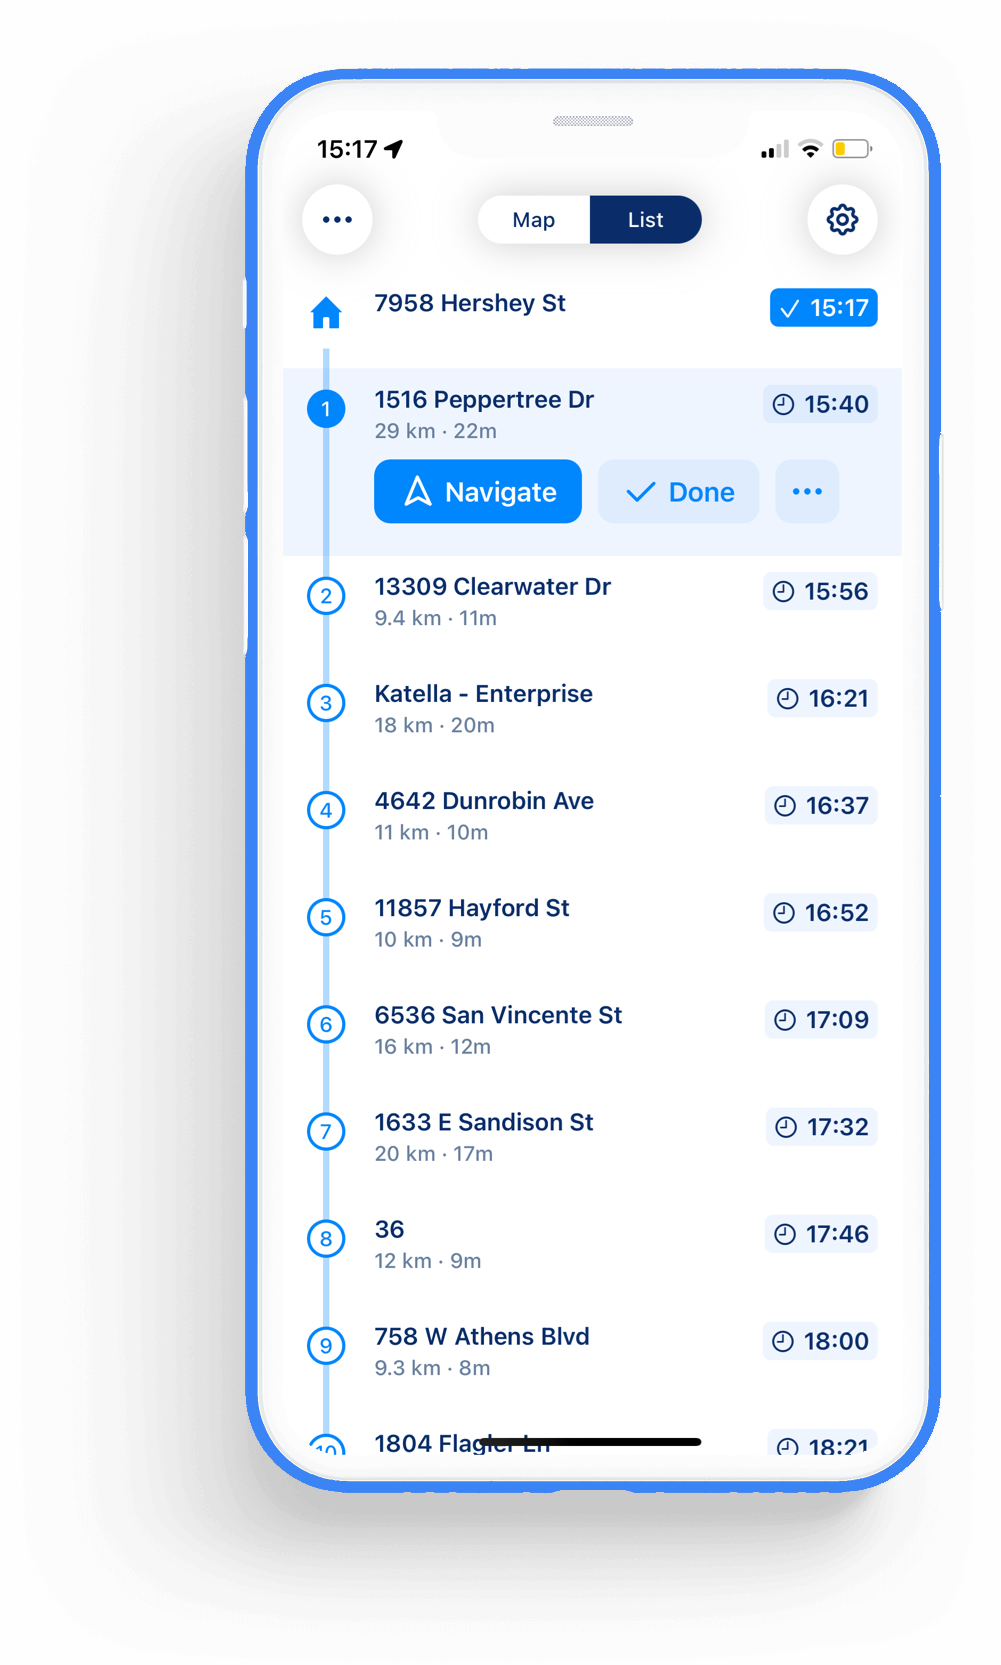 MyWay Route Planner - List View